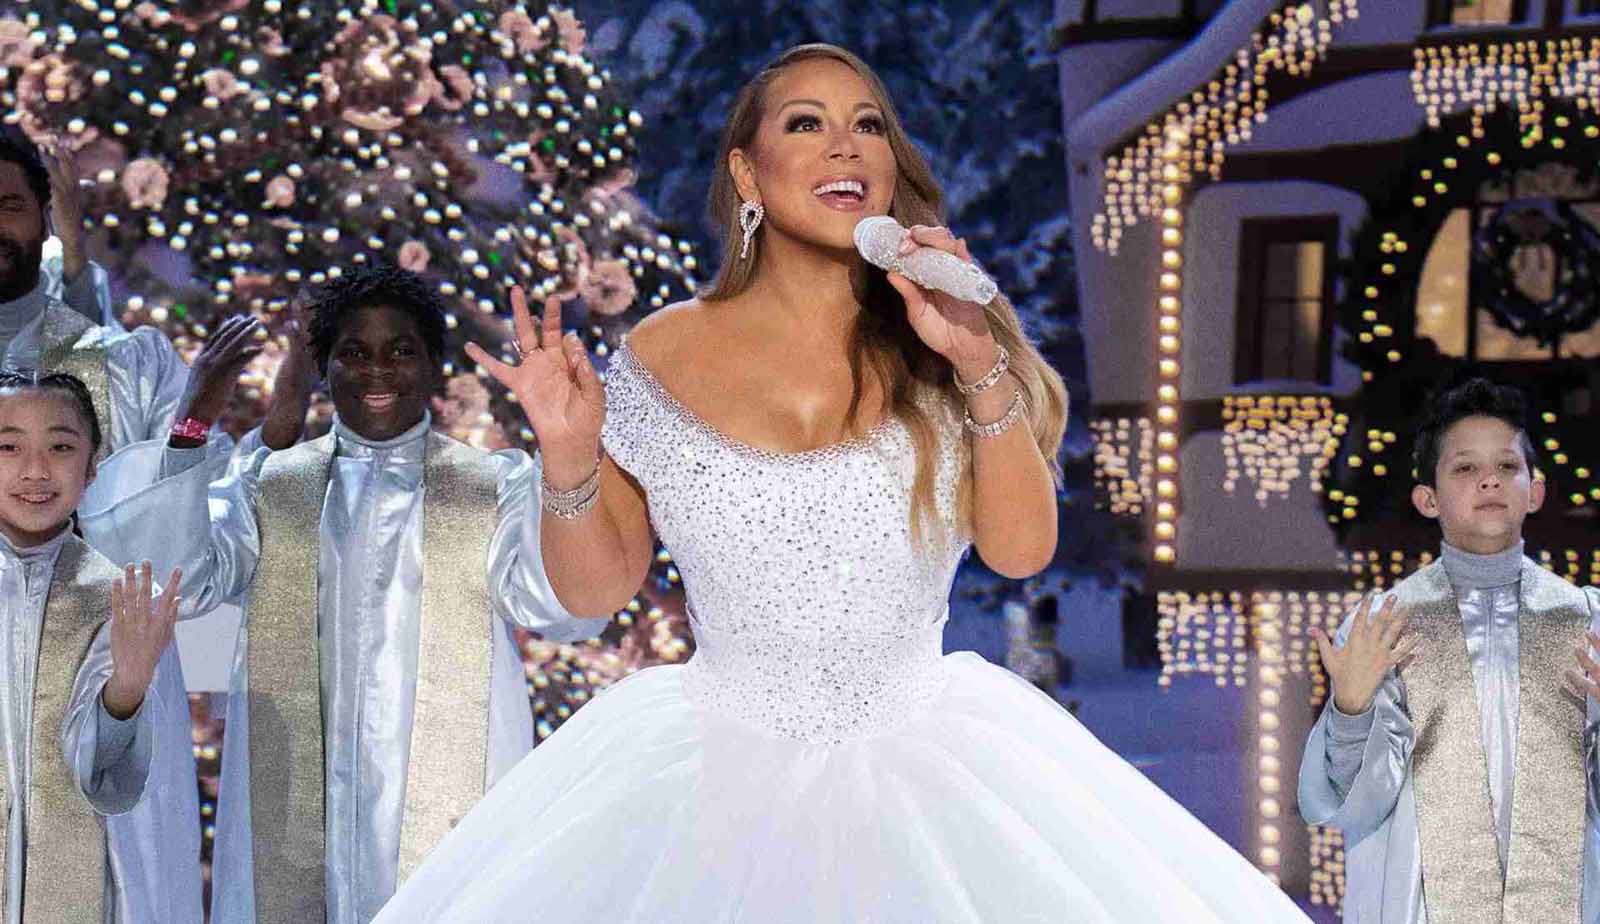 The unofficial Queen of Christmas finally has her own special. Check out everything you need to know about Mariah Carey's new Christmas special.